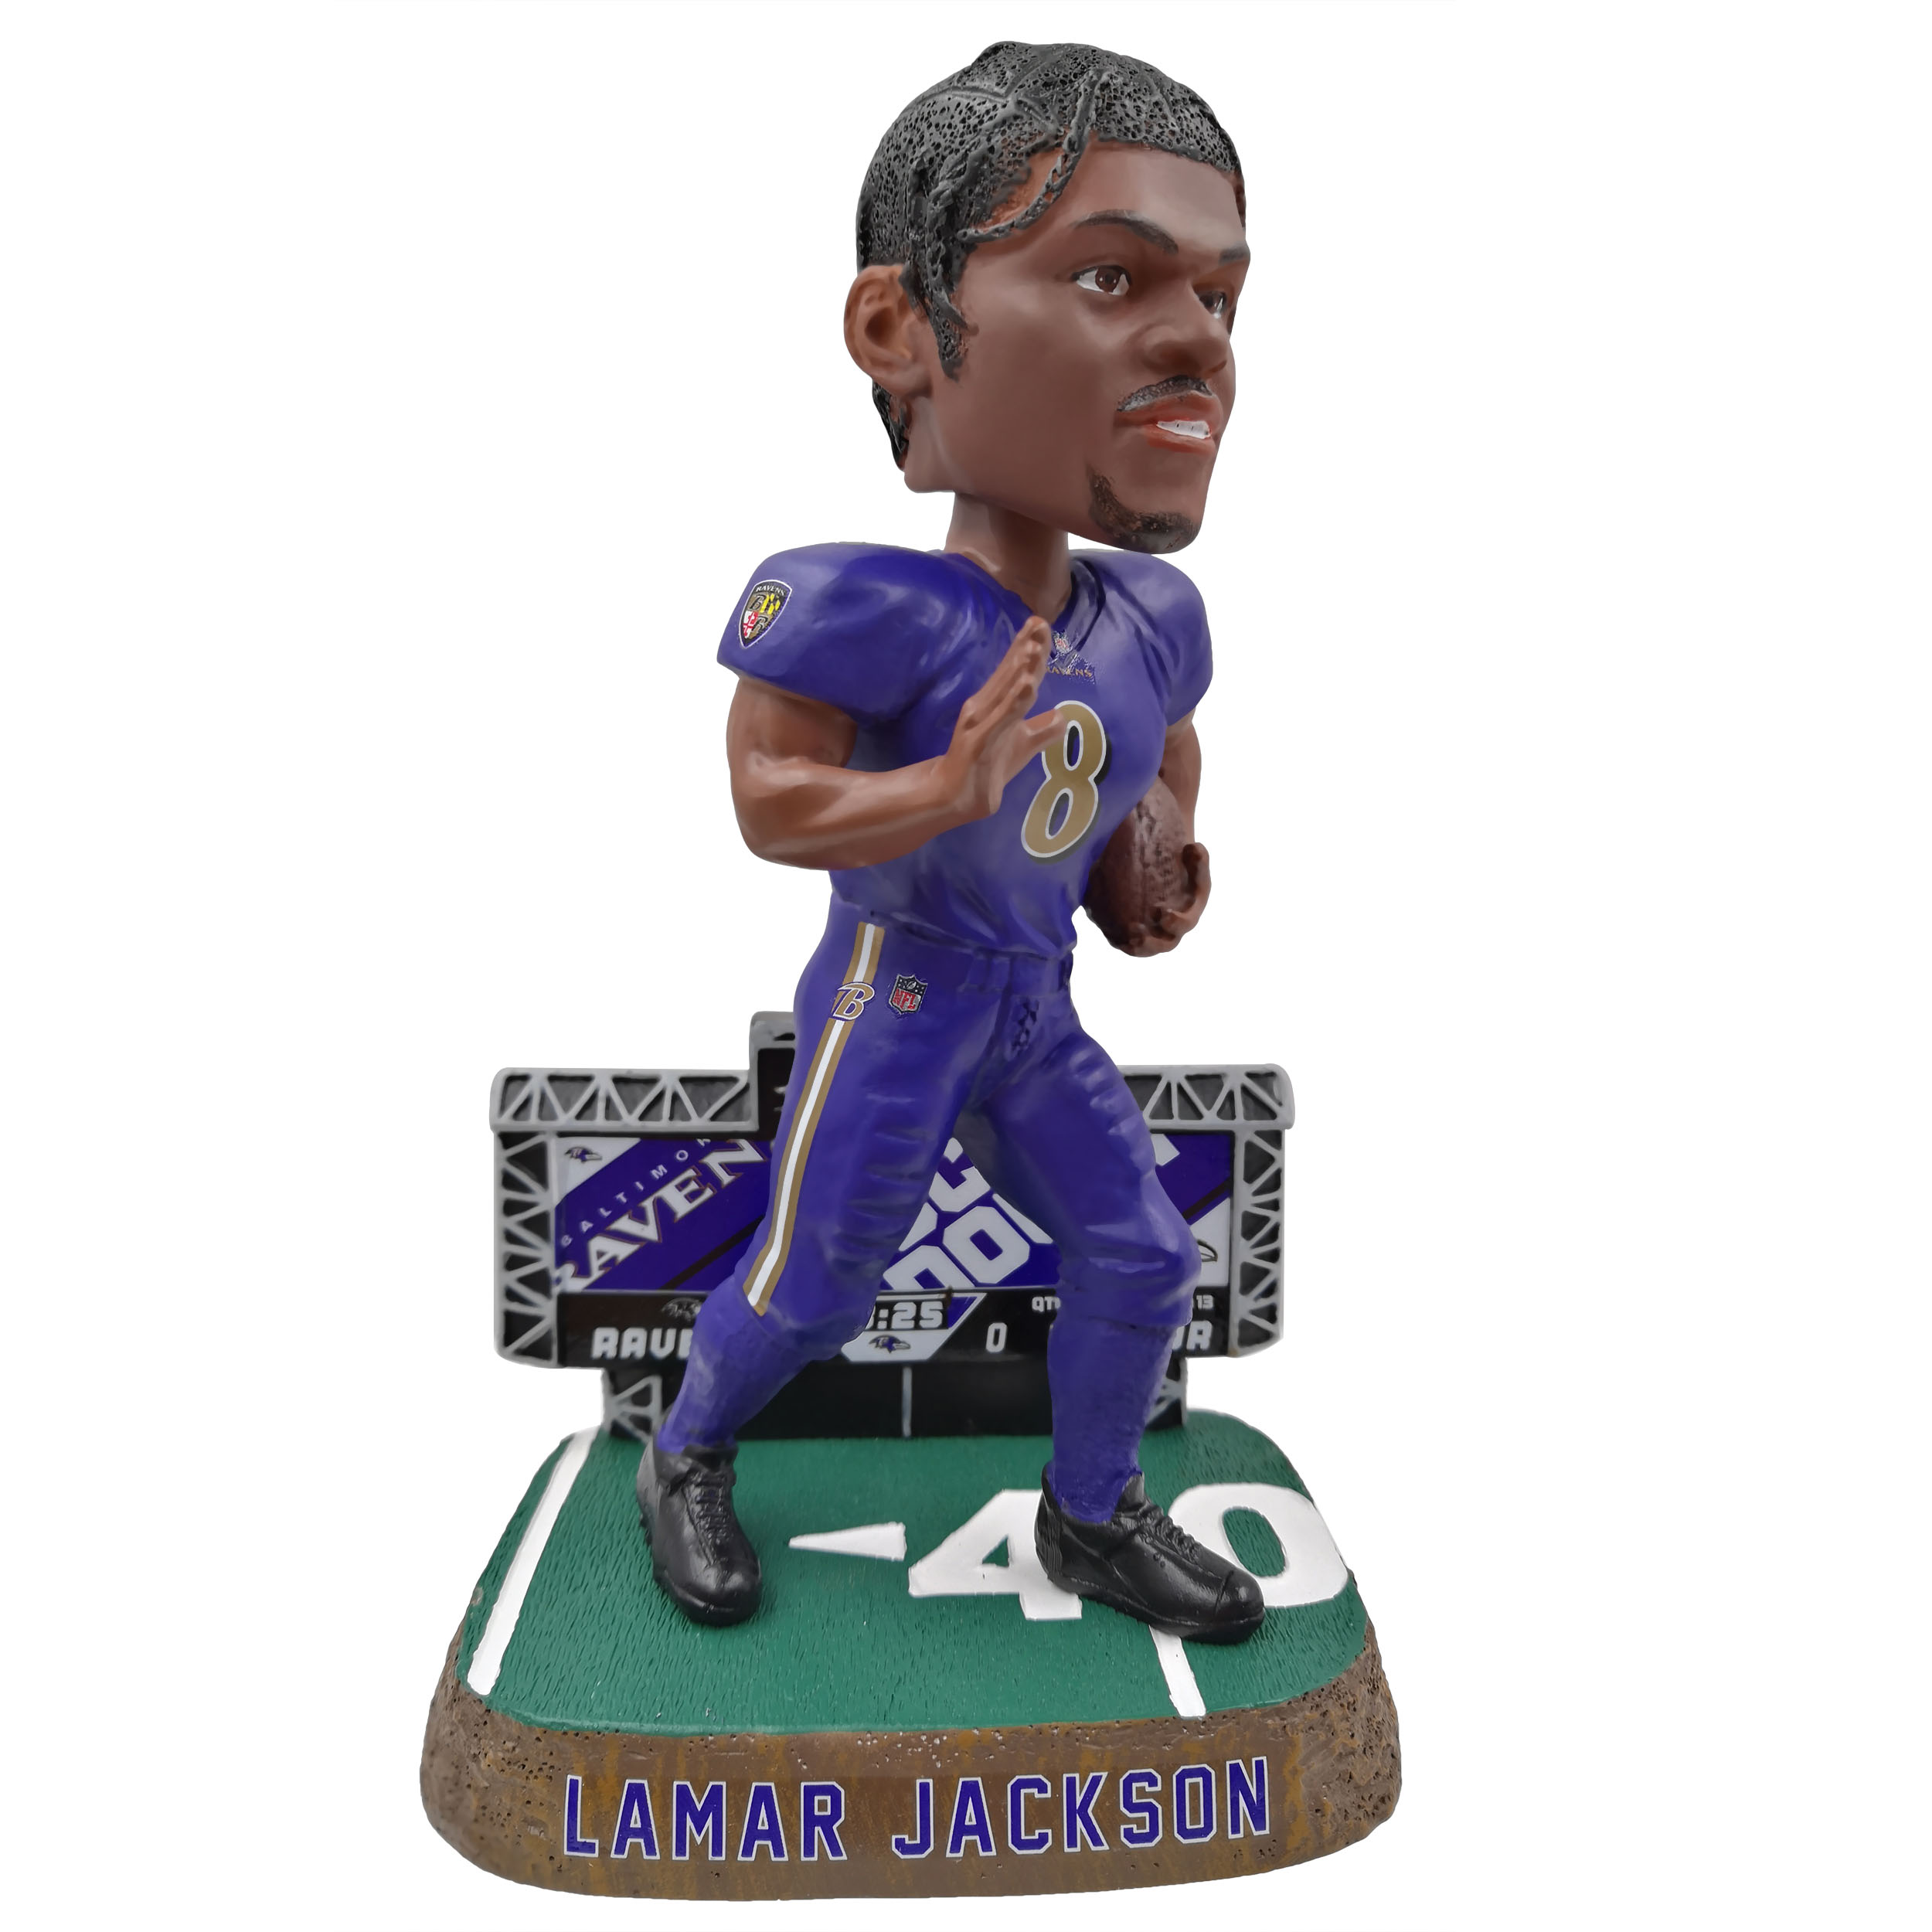 Lamar Jackson Bobbleheads | National Bobblehead Hall of Fame and Museum